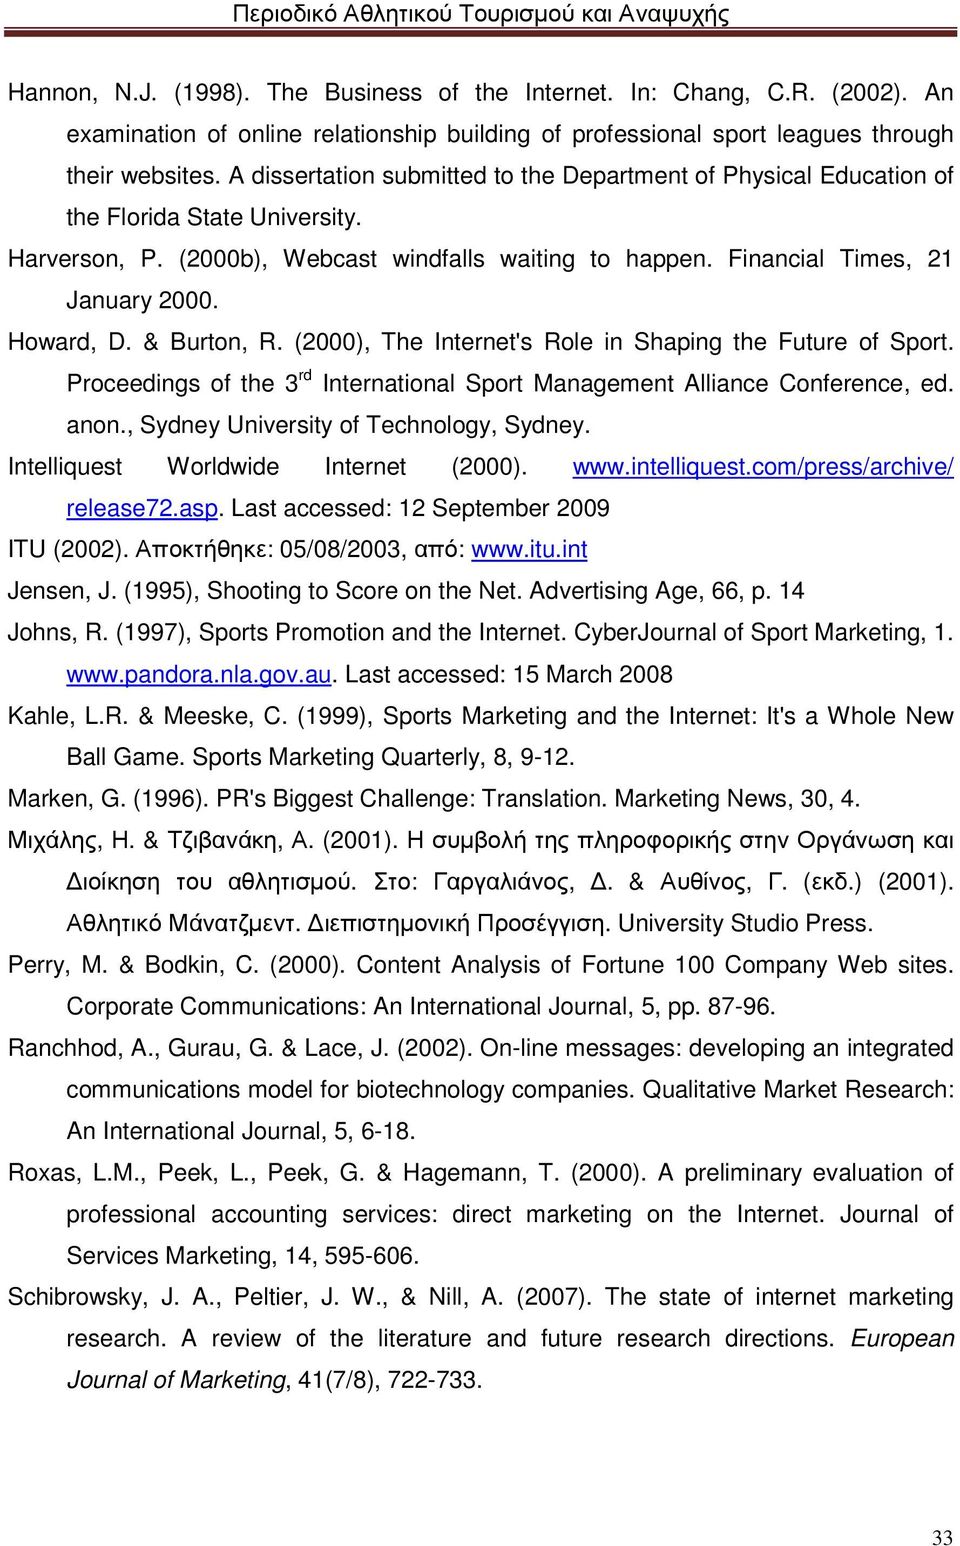 Howard, D. & Burton, R. (2000), The Internet's Role in Shaping the Future of Sport. Proceedings of the 3 rd International Sport Management Alliance Conference, ed. anon.